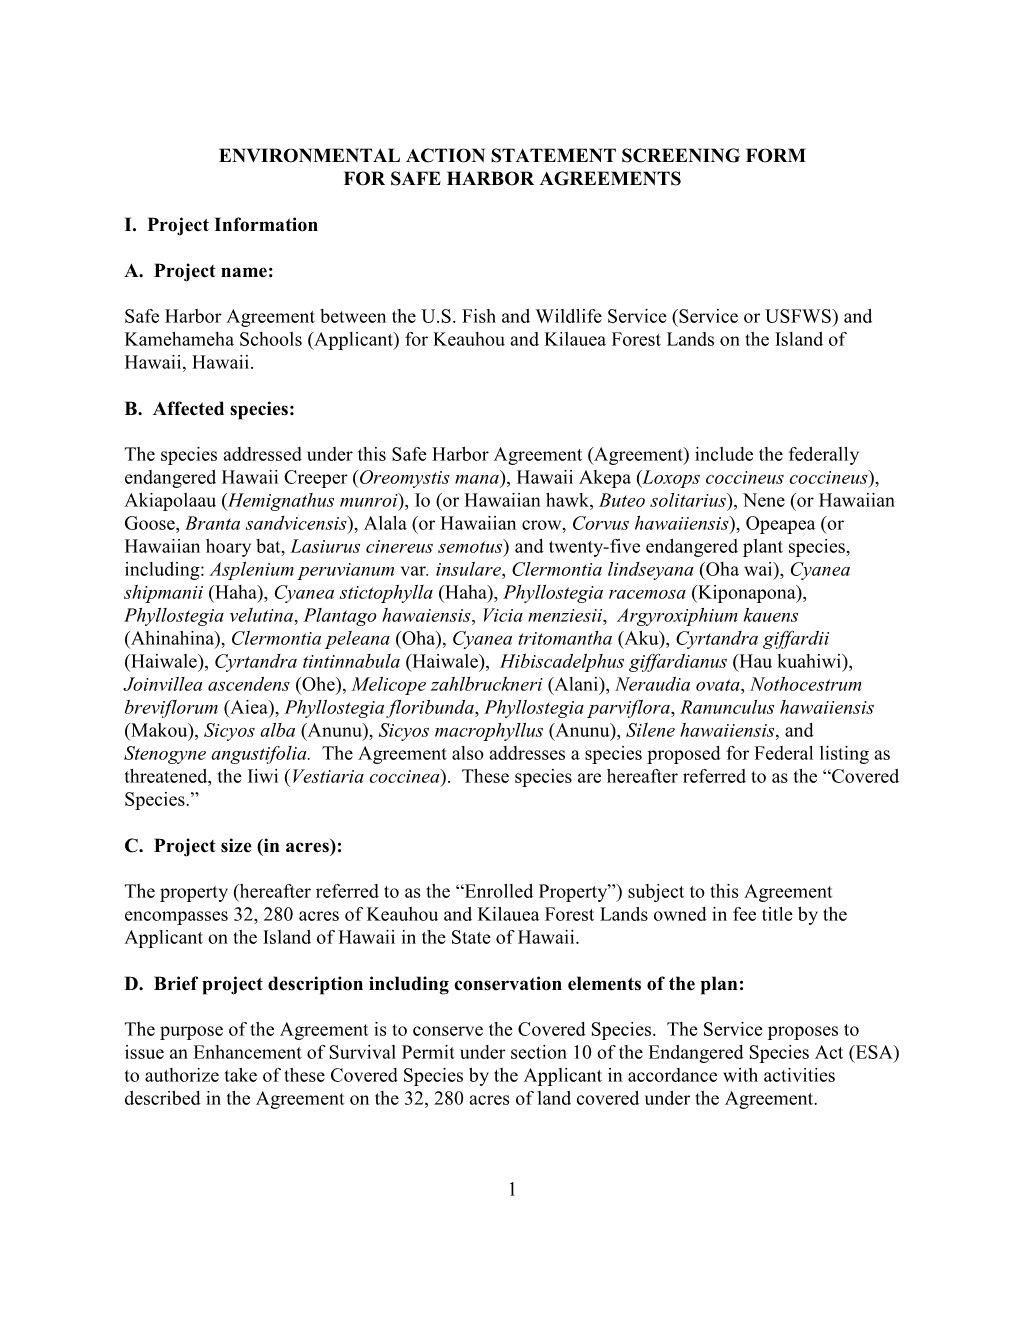 Environmental Action Statement Screening Form for Safe Harbor Agreements